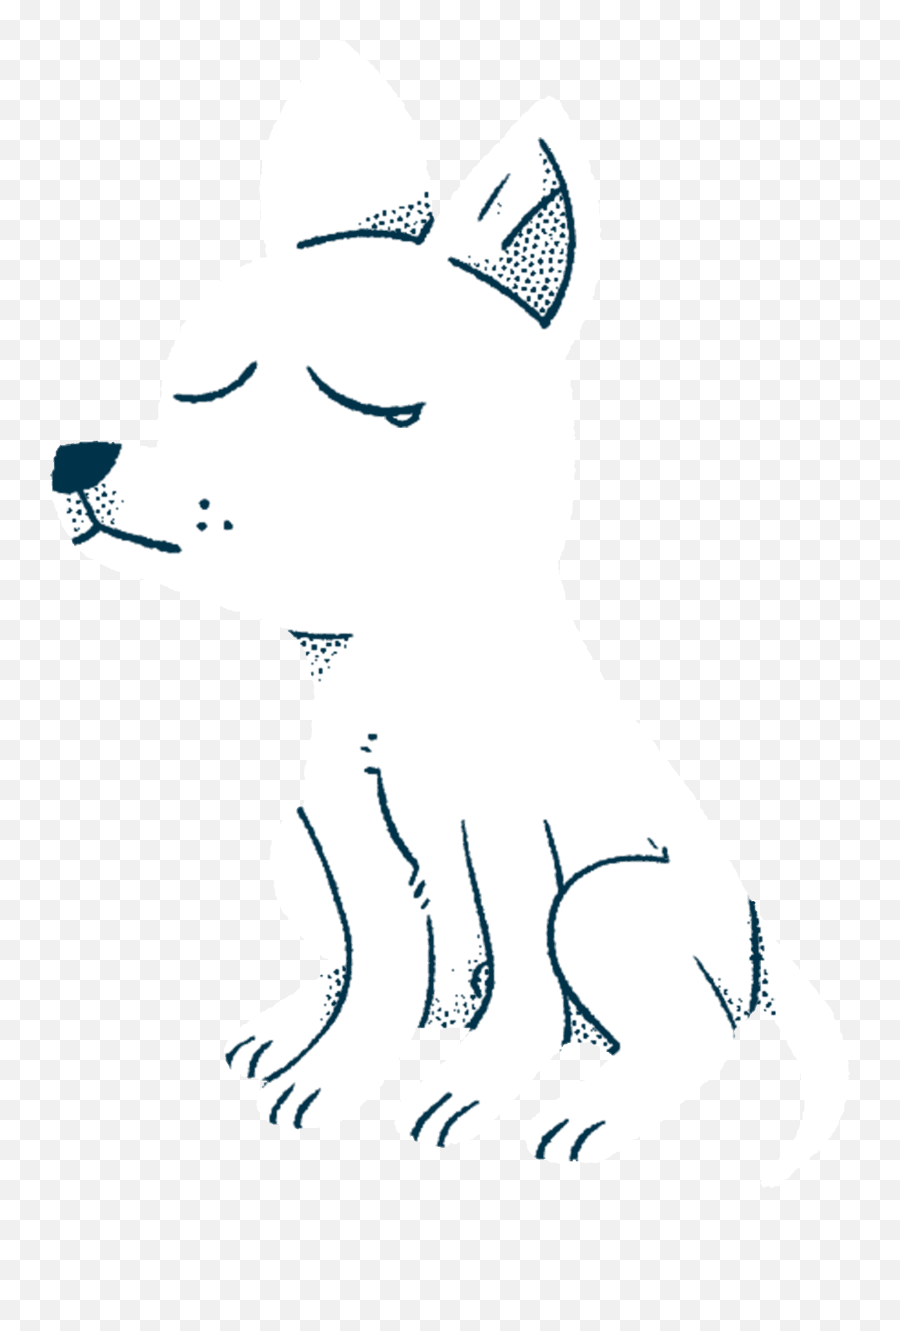 Dog Sticker for iOS & Android